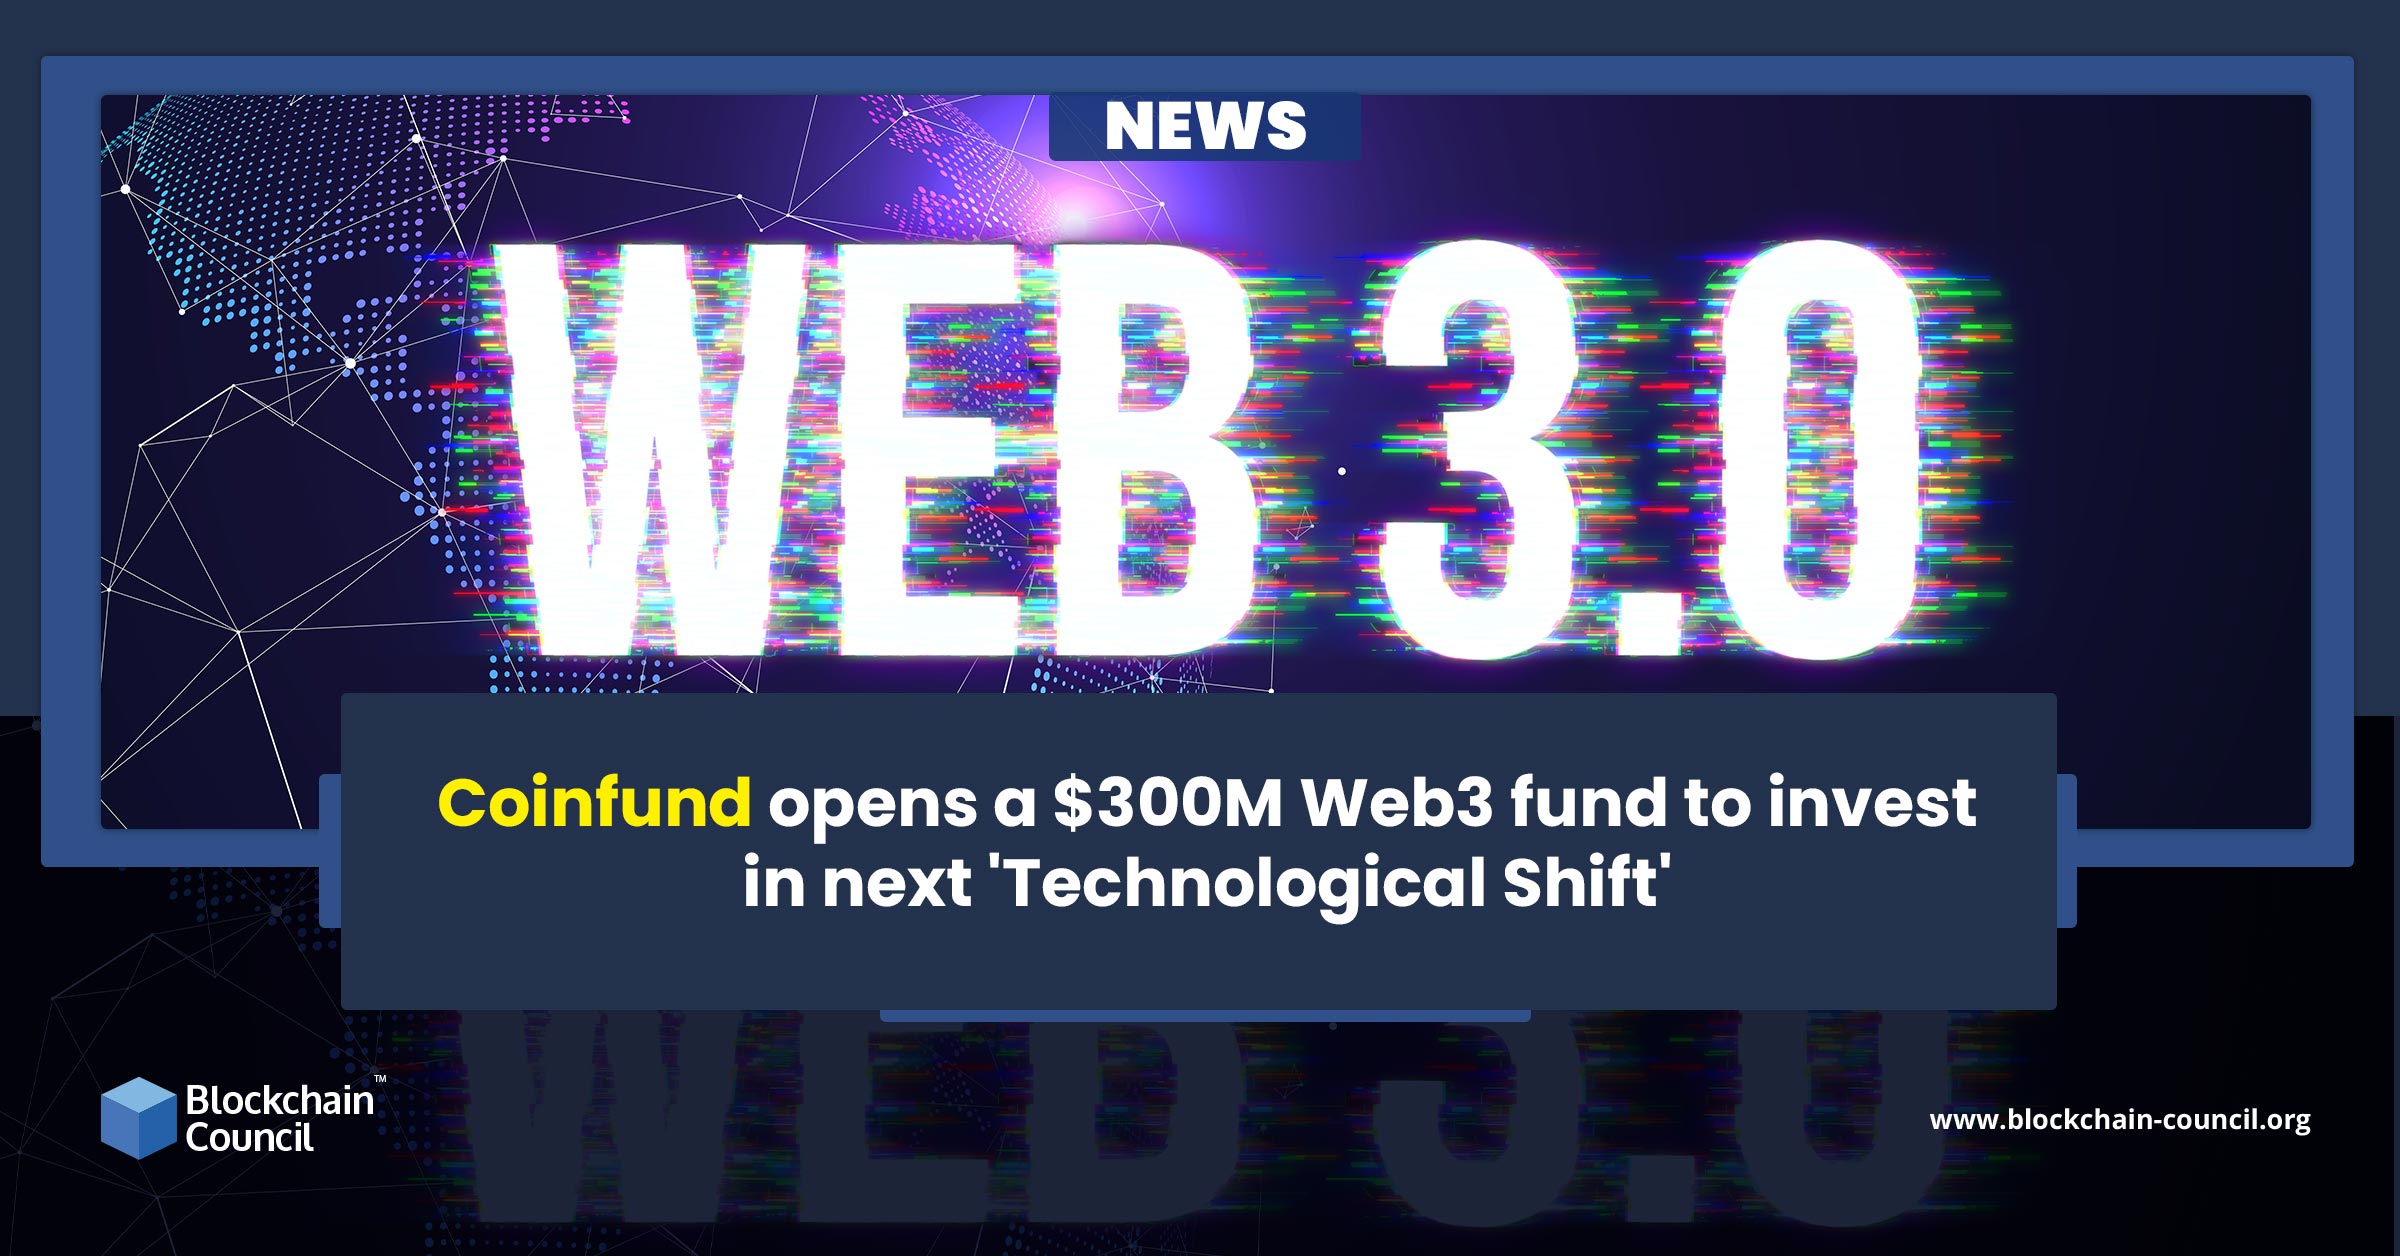 Coinfund opens a $300M Web3 fund to invest in next 'Technological Shift